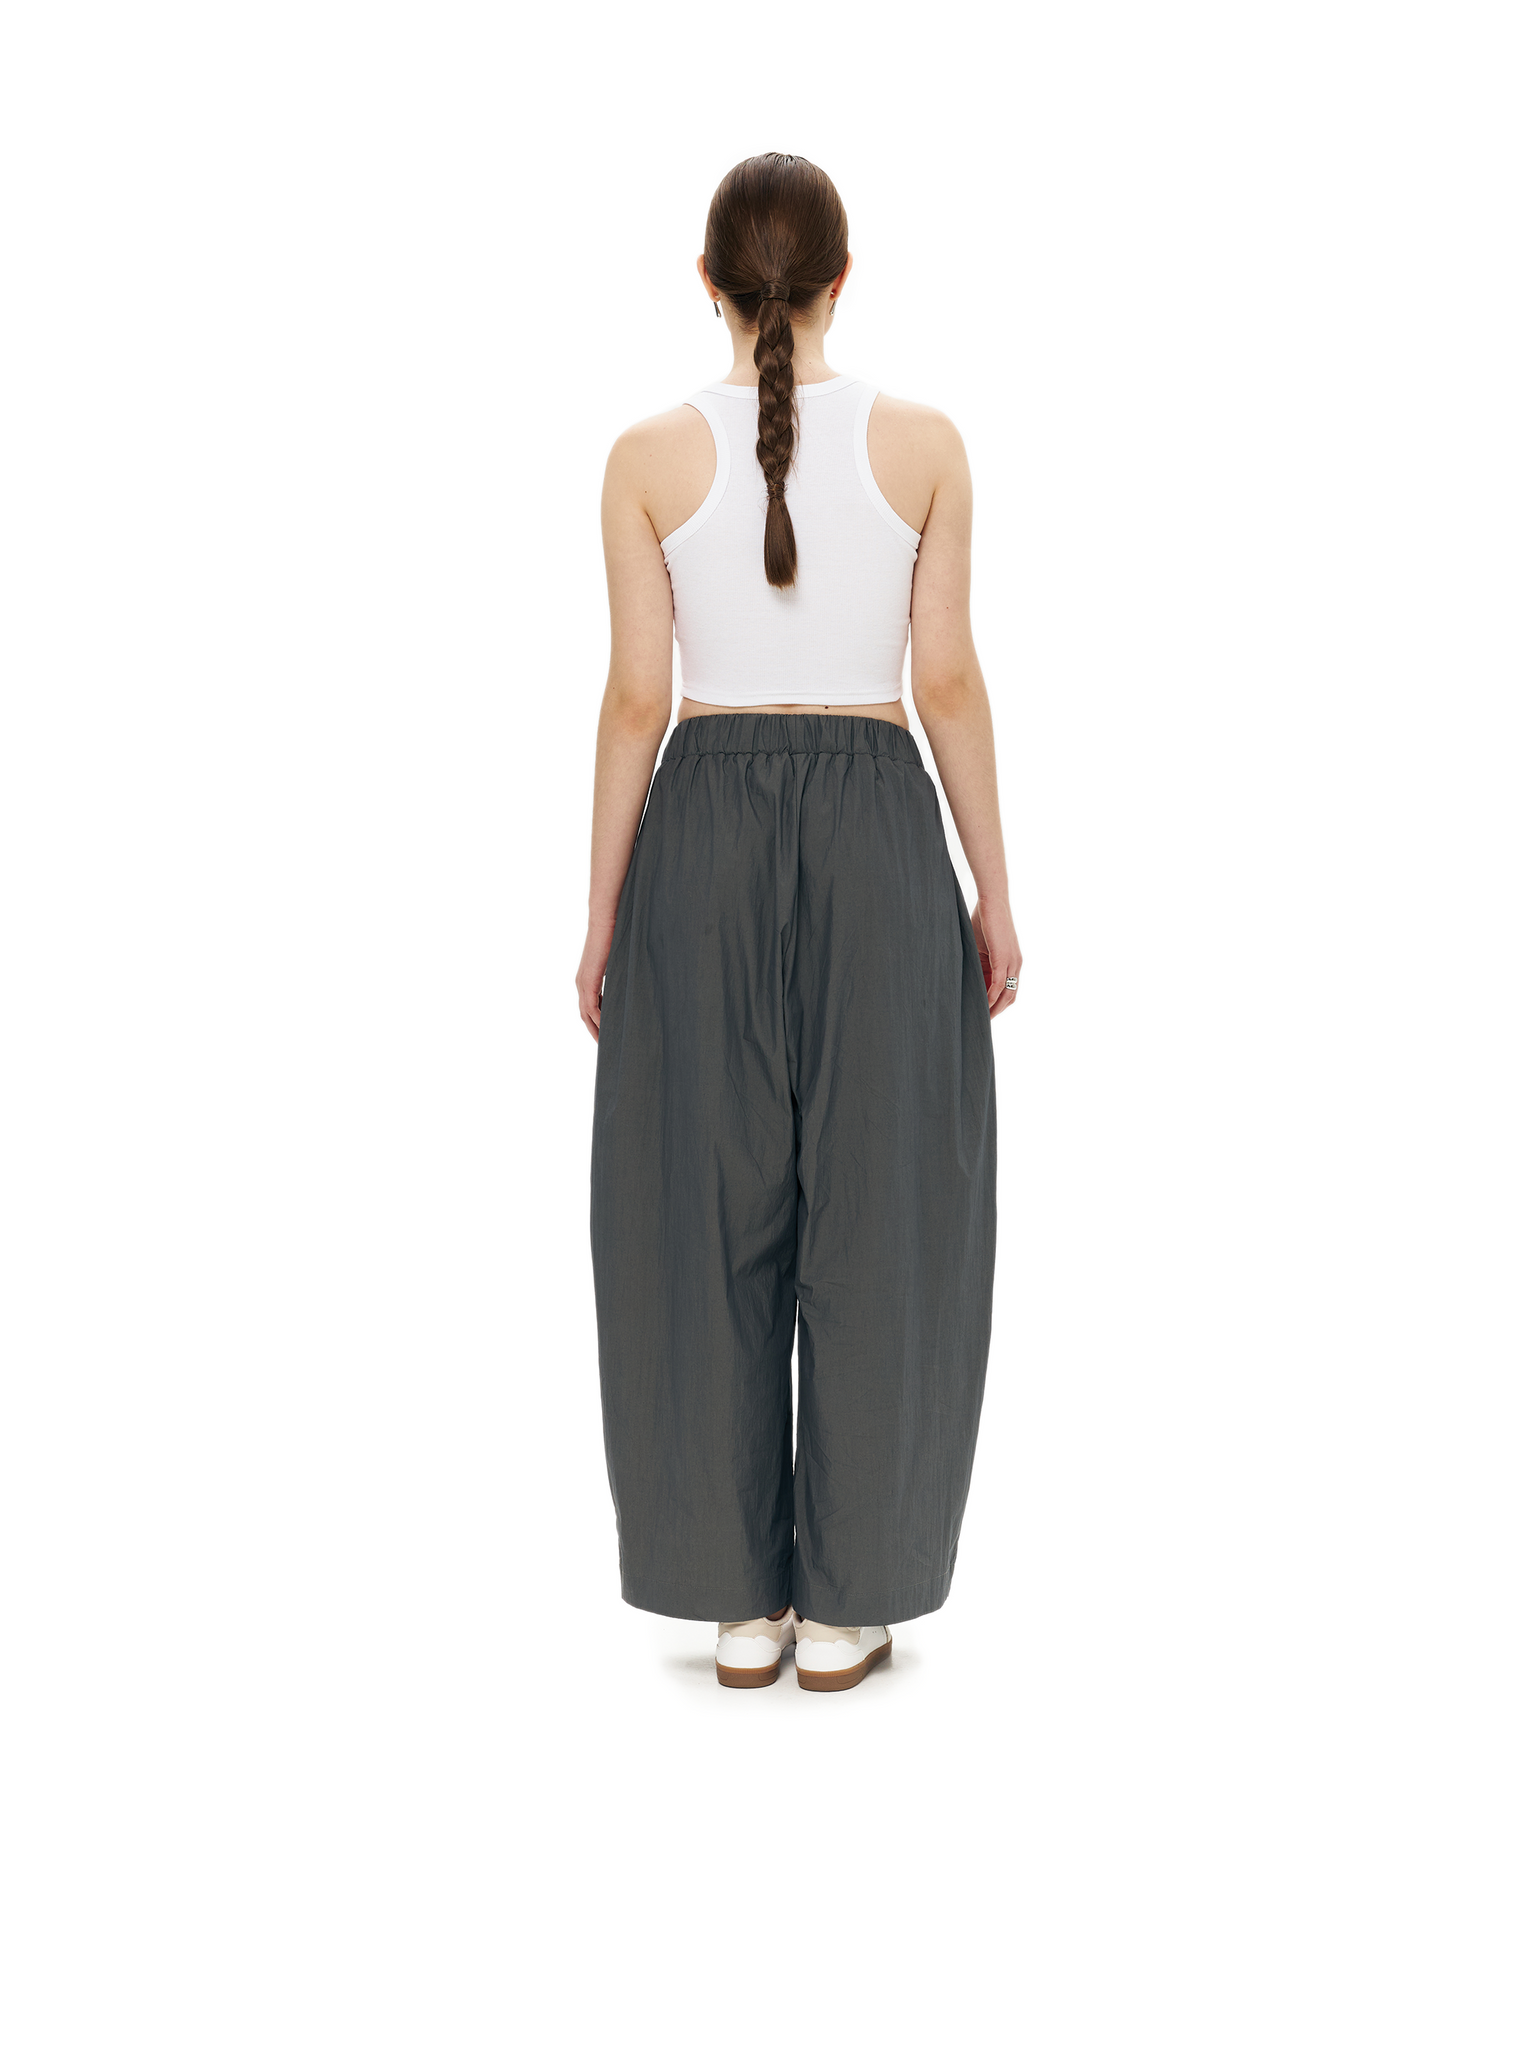 amie pants in graphite